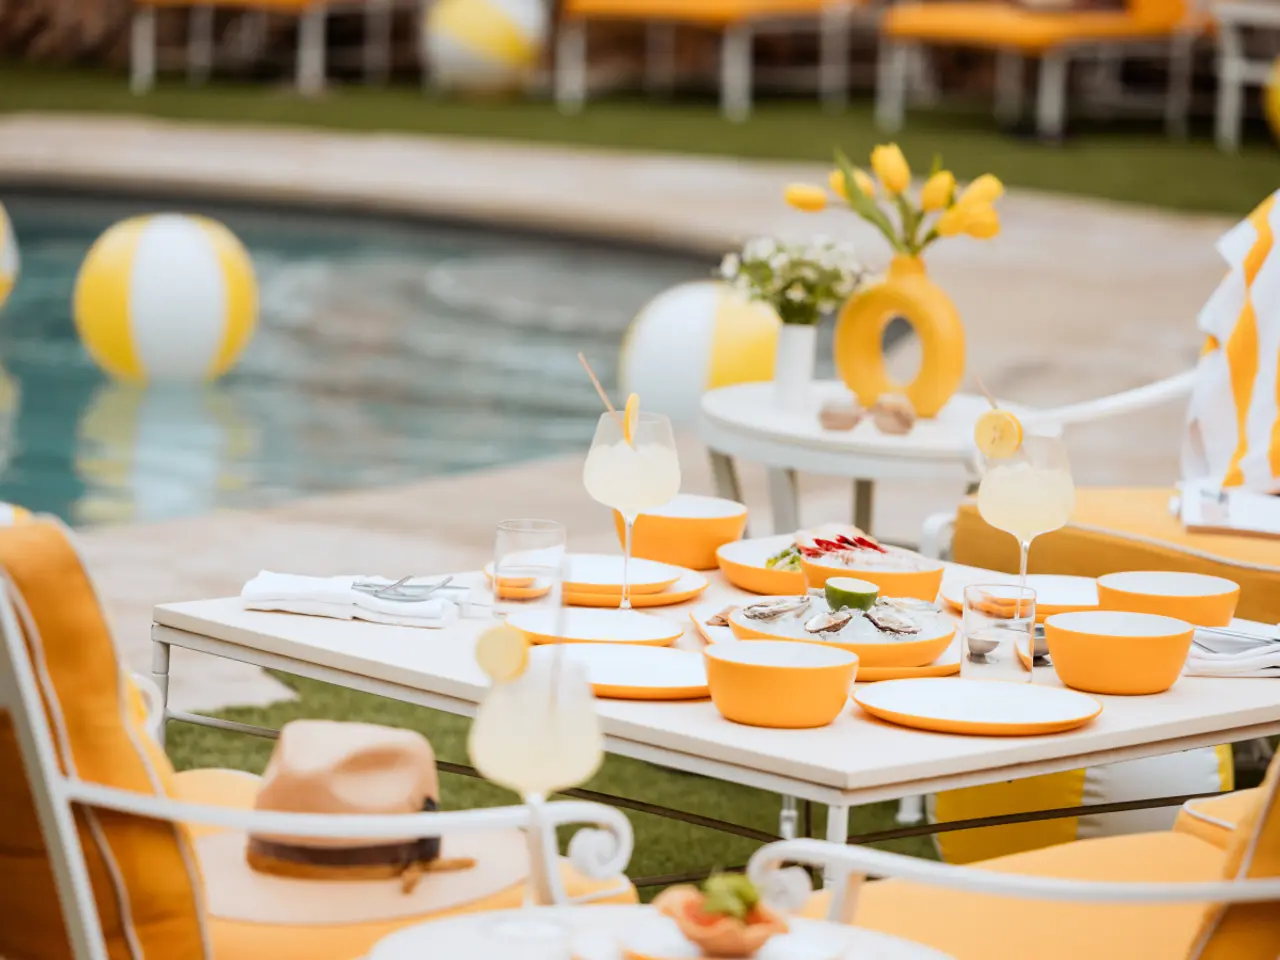 A summer-themed outdoor dining table is set with yellow and white dinnerware, fresh lemons, refreshments, and a straw hat, with a pool and beach balls in the background.